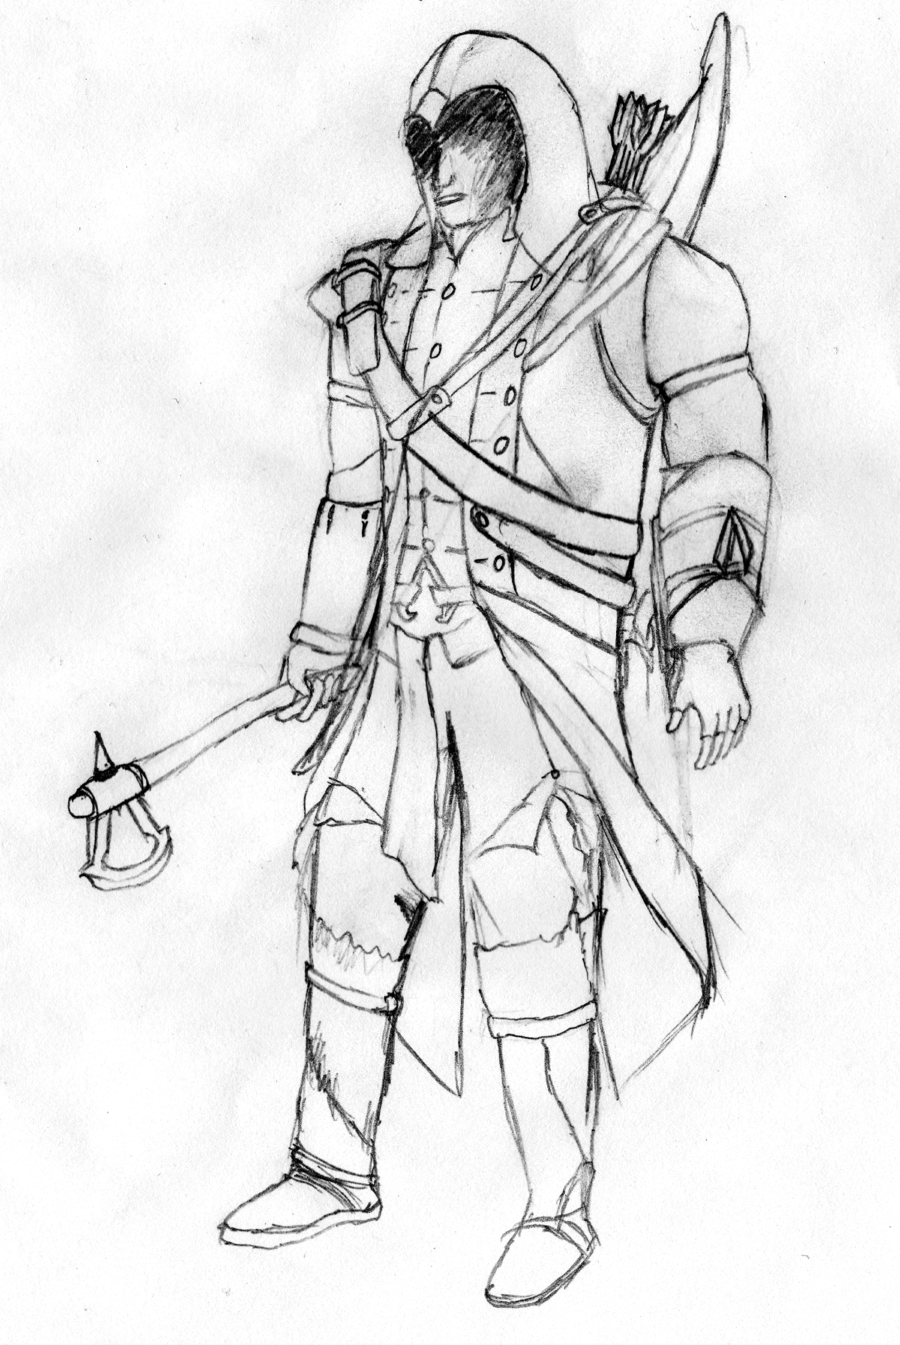 connor_kenway__pencil_sketch__by_drelement-d53xg05.png